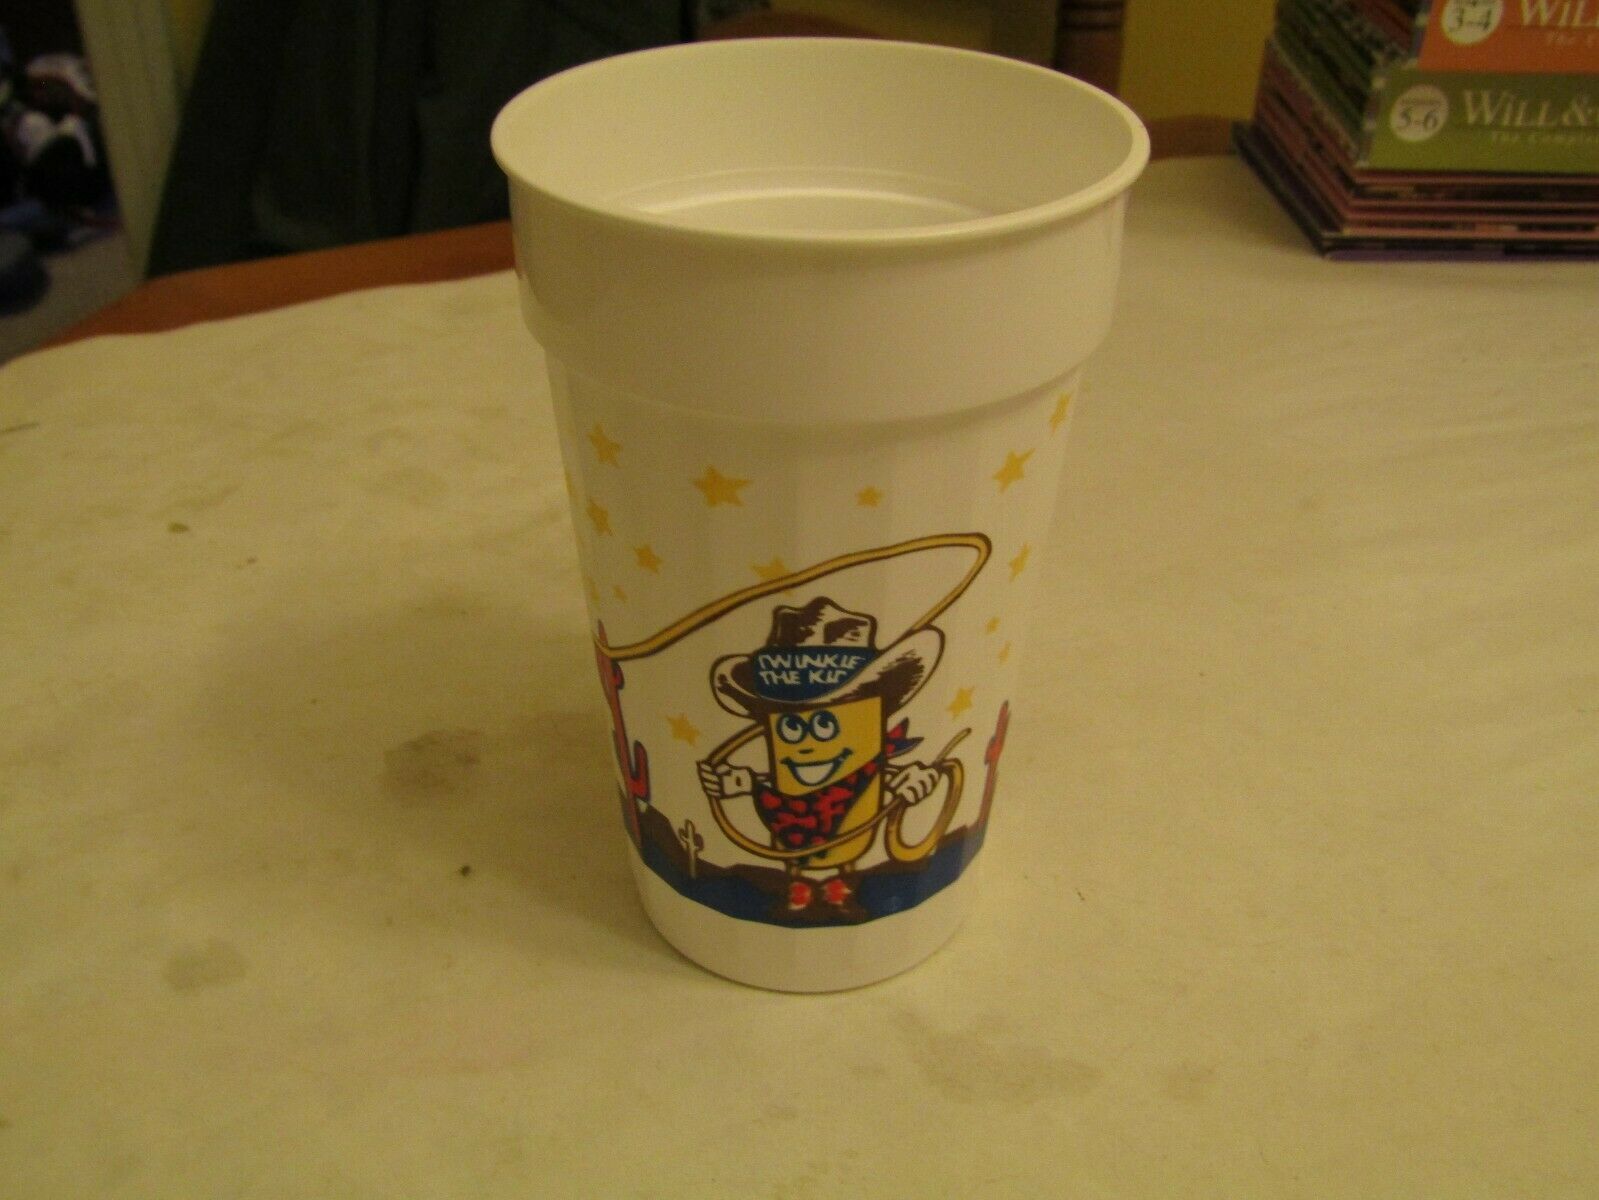 Primary image for Hostess Twinkie the Kid Cup